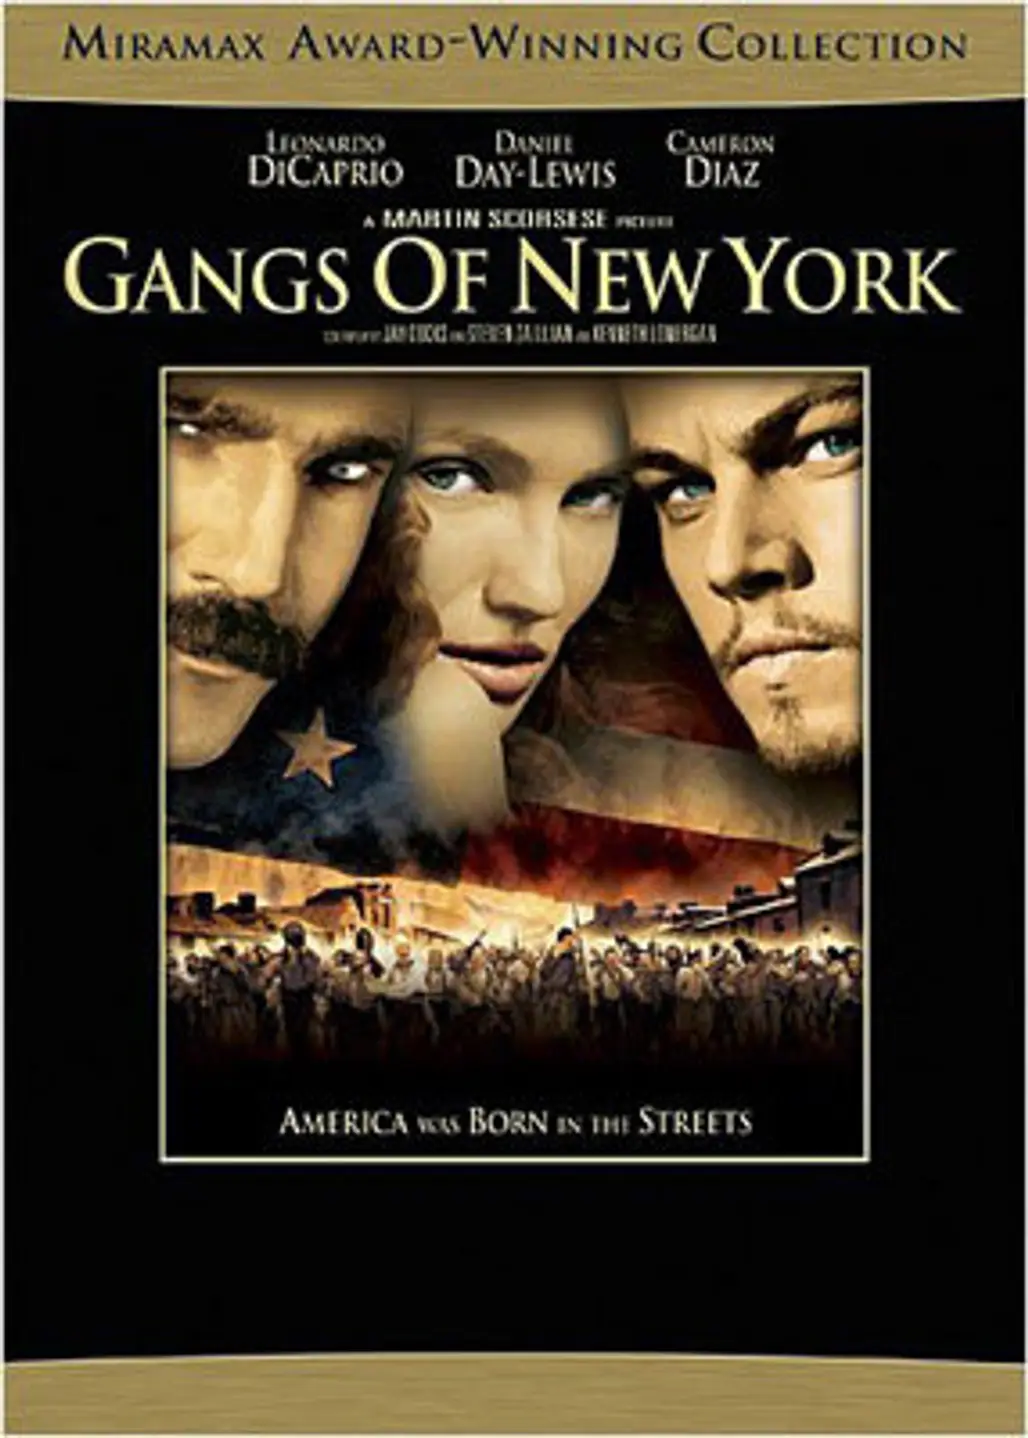 Vallon in “the Gangs of New York”